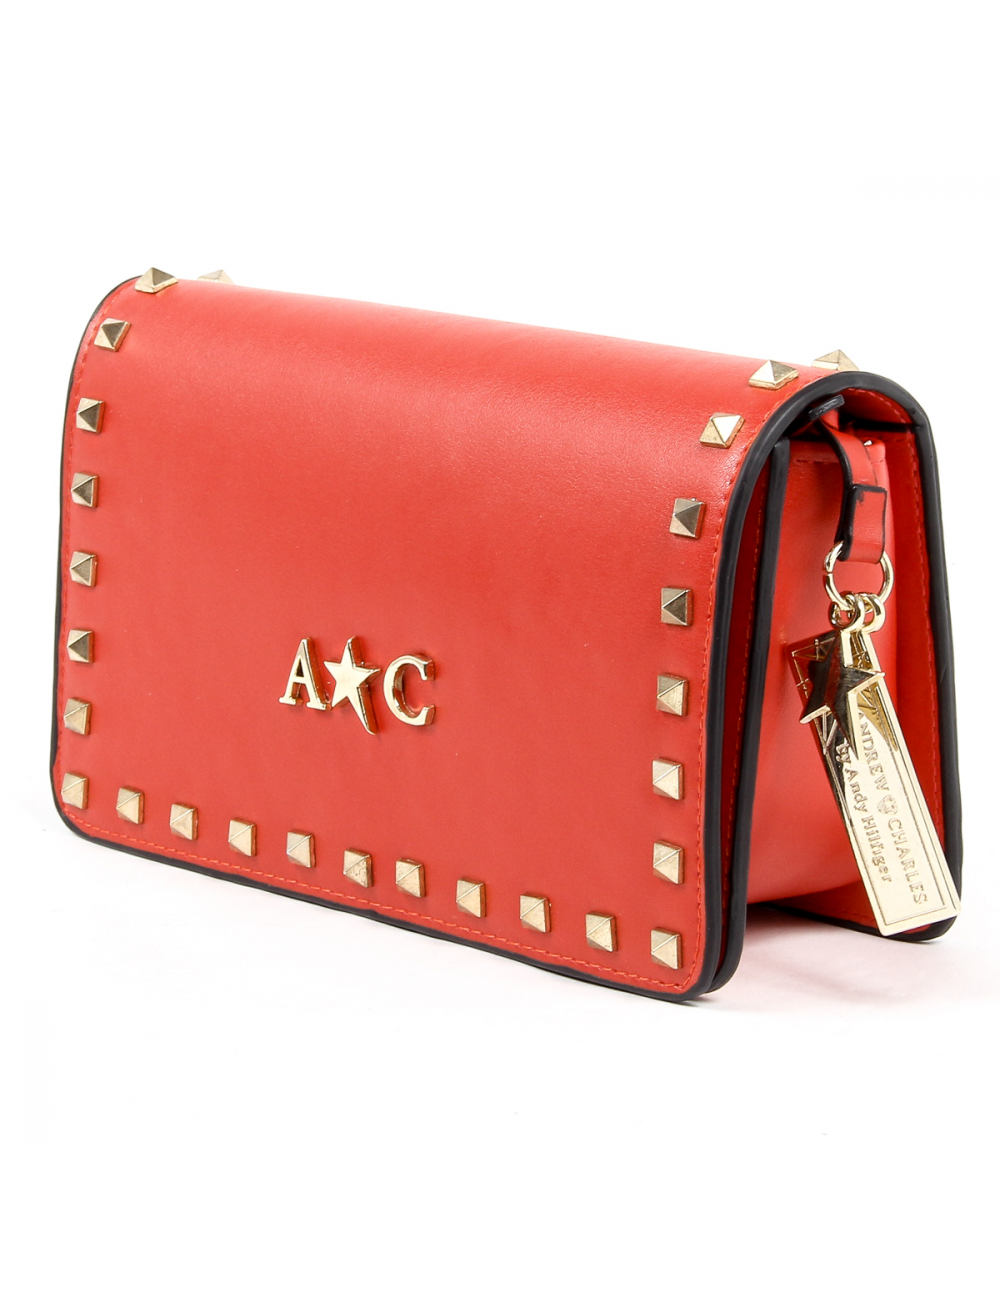 Andrew Charles Womens Handbag Red PAIGE - YuppyCollections